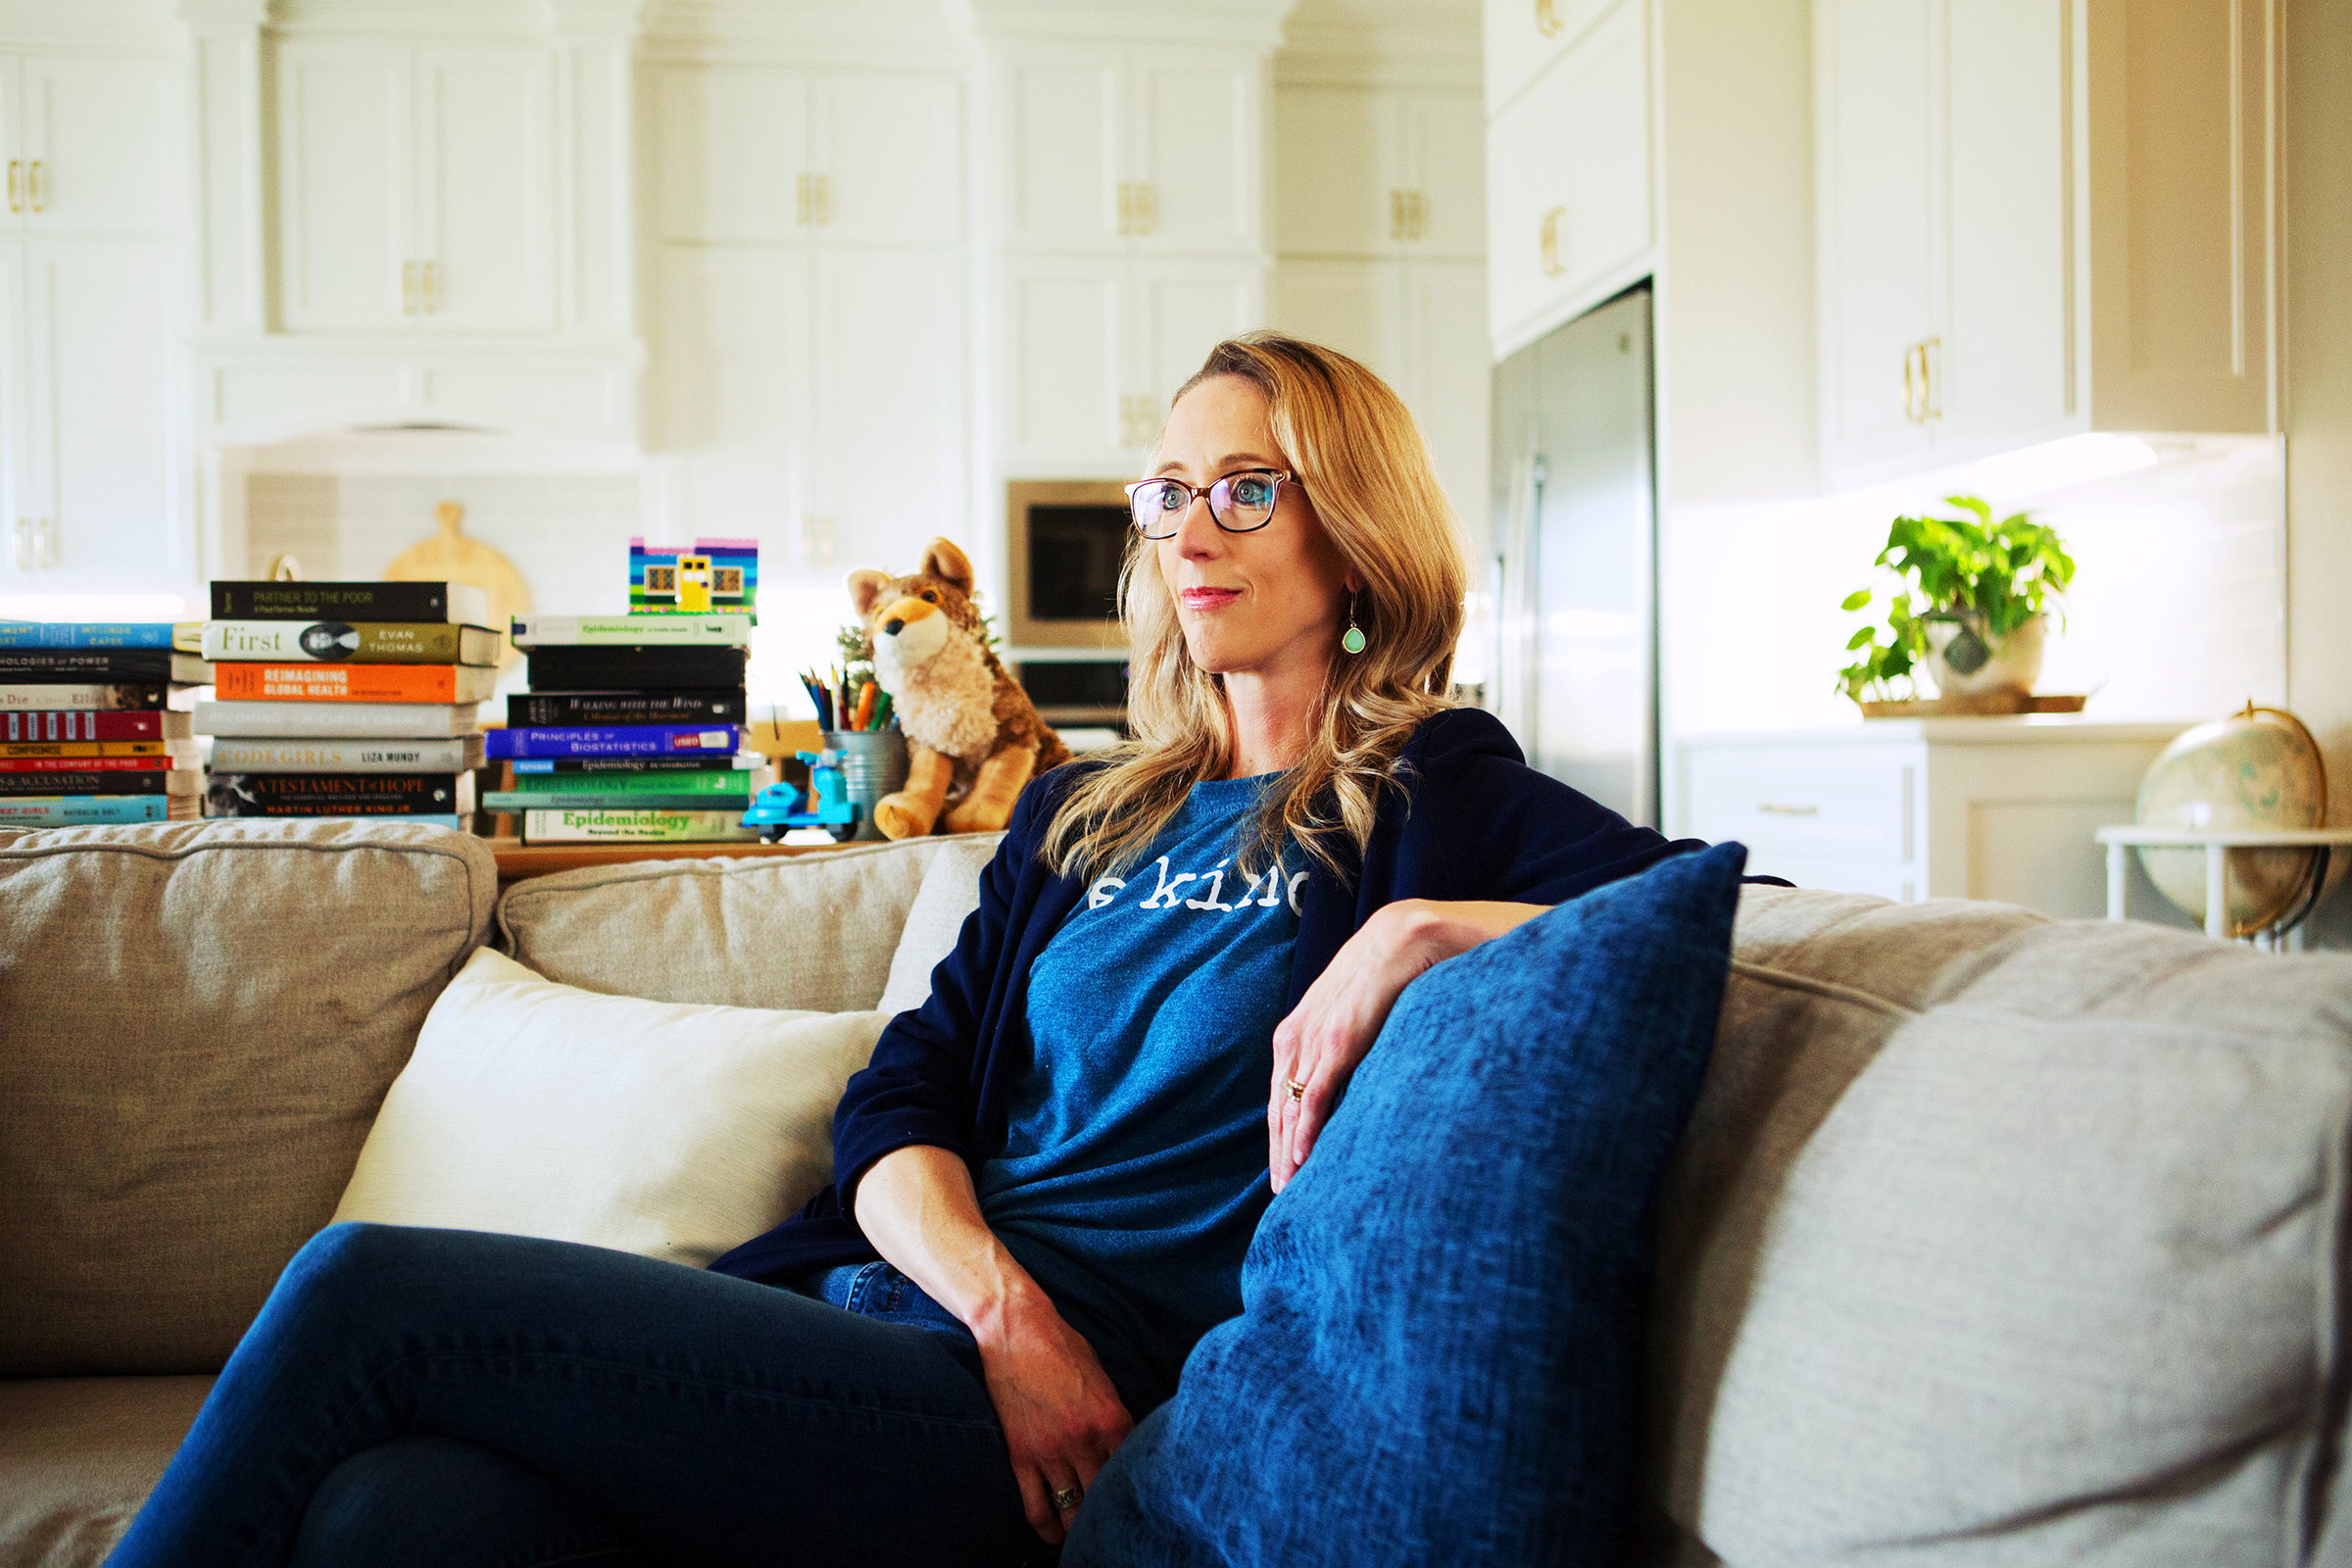 Emily Smith, who runs the Facebook page Friendly Neighbor Epidemiologist, in her home near Waco, Texas (Mary Kang for TIME)